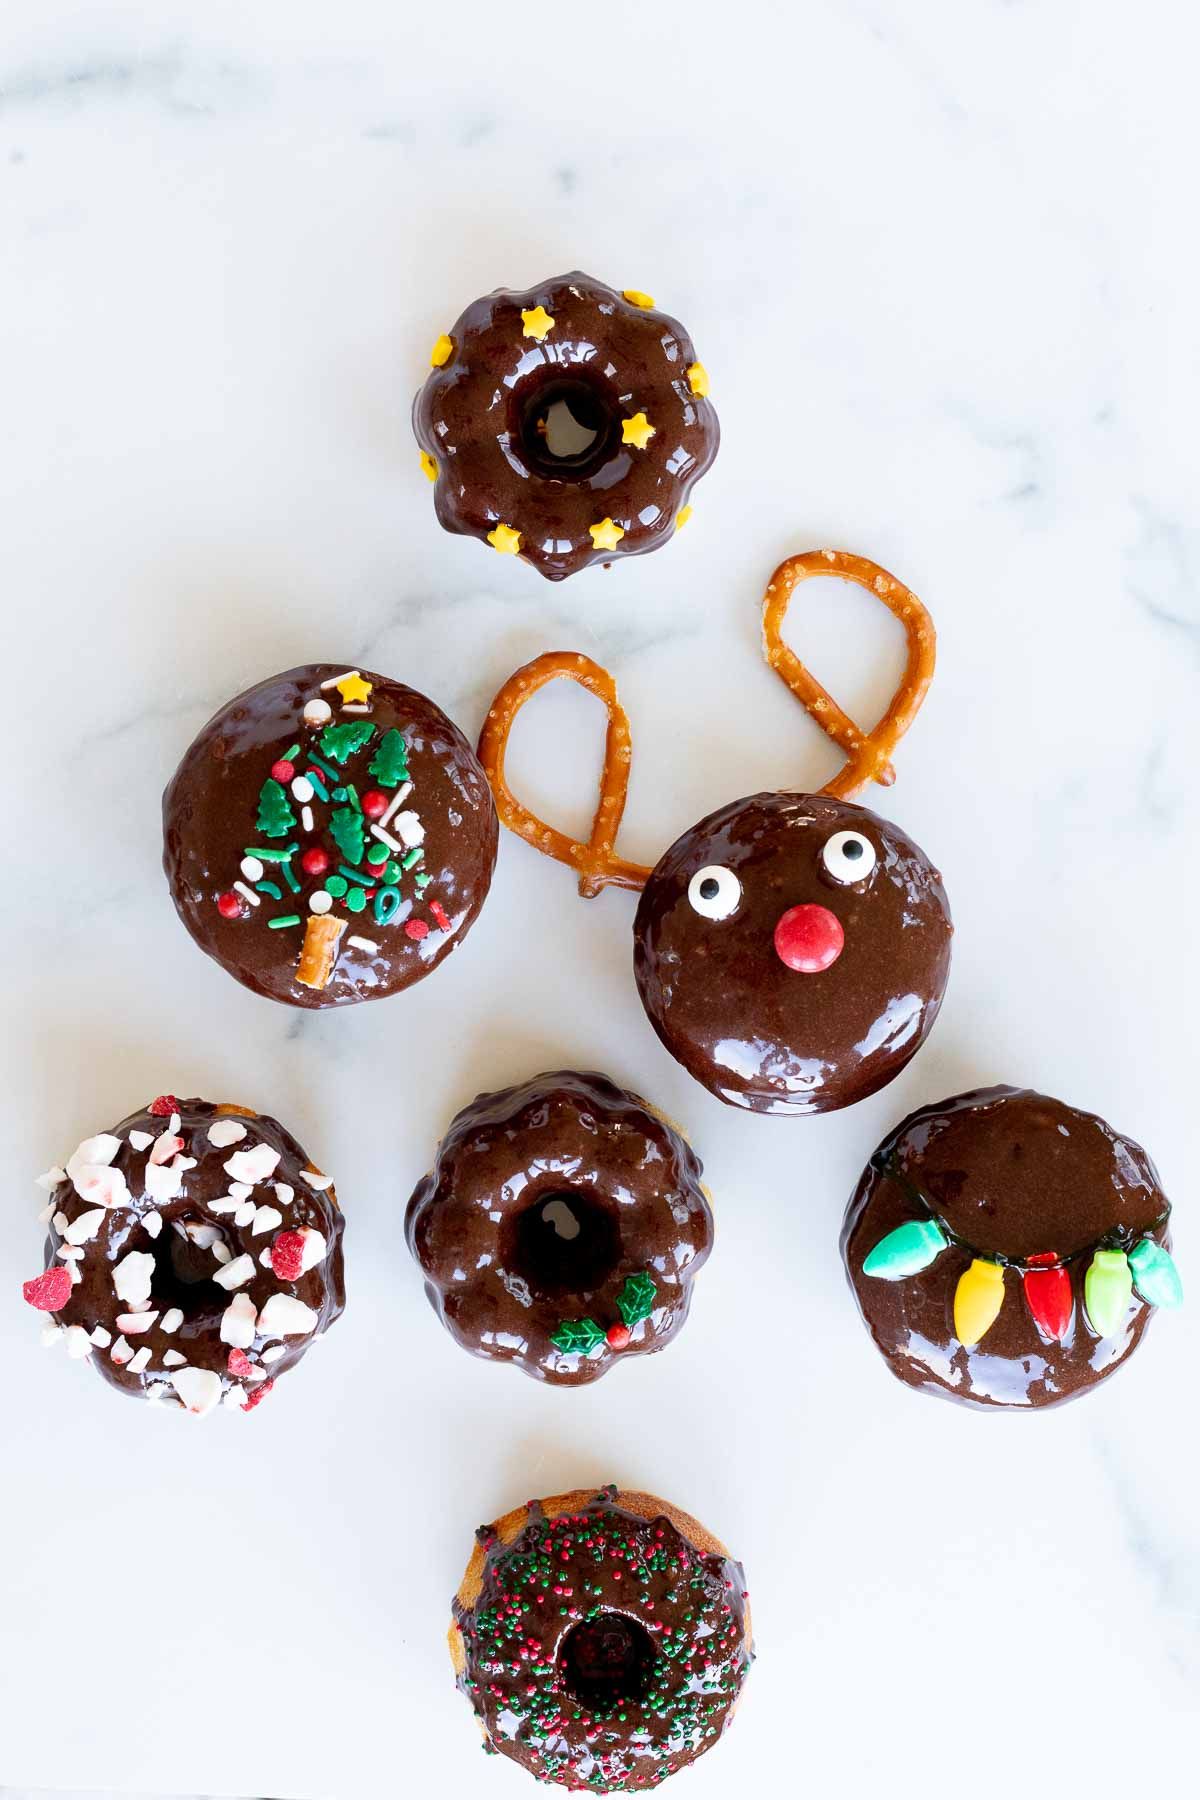 Cute Christmas donuts shaped into a tree, laid out on a white marble countertop.